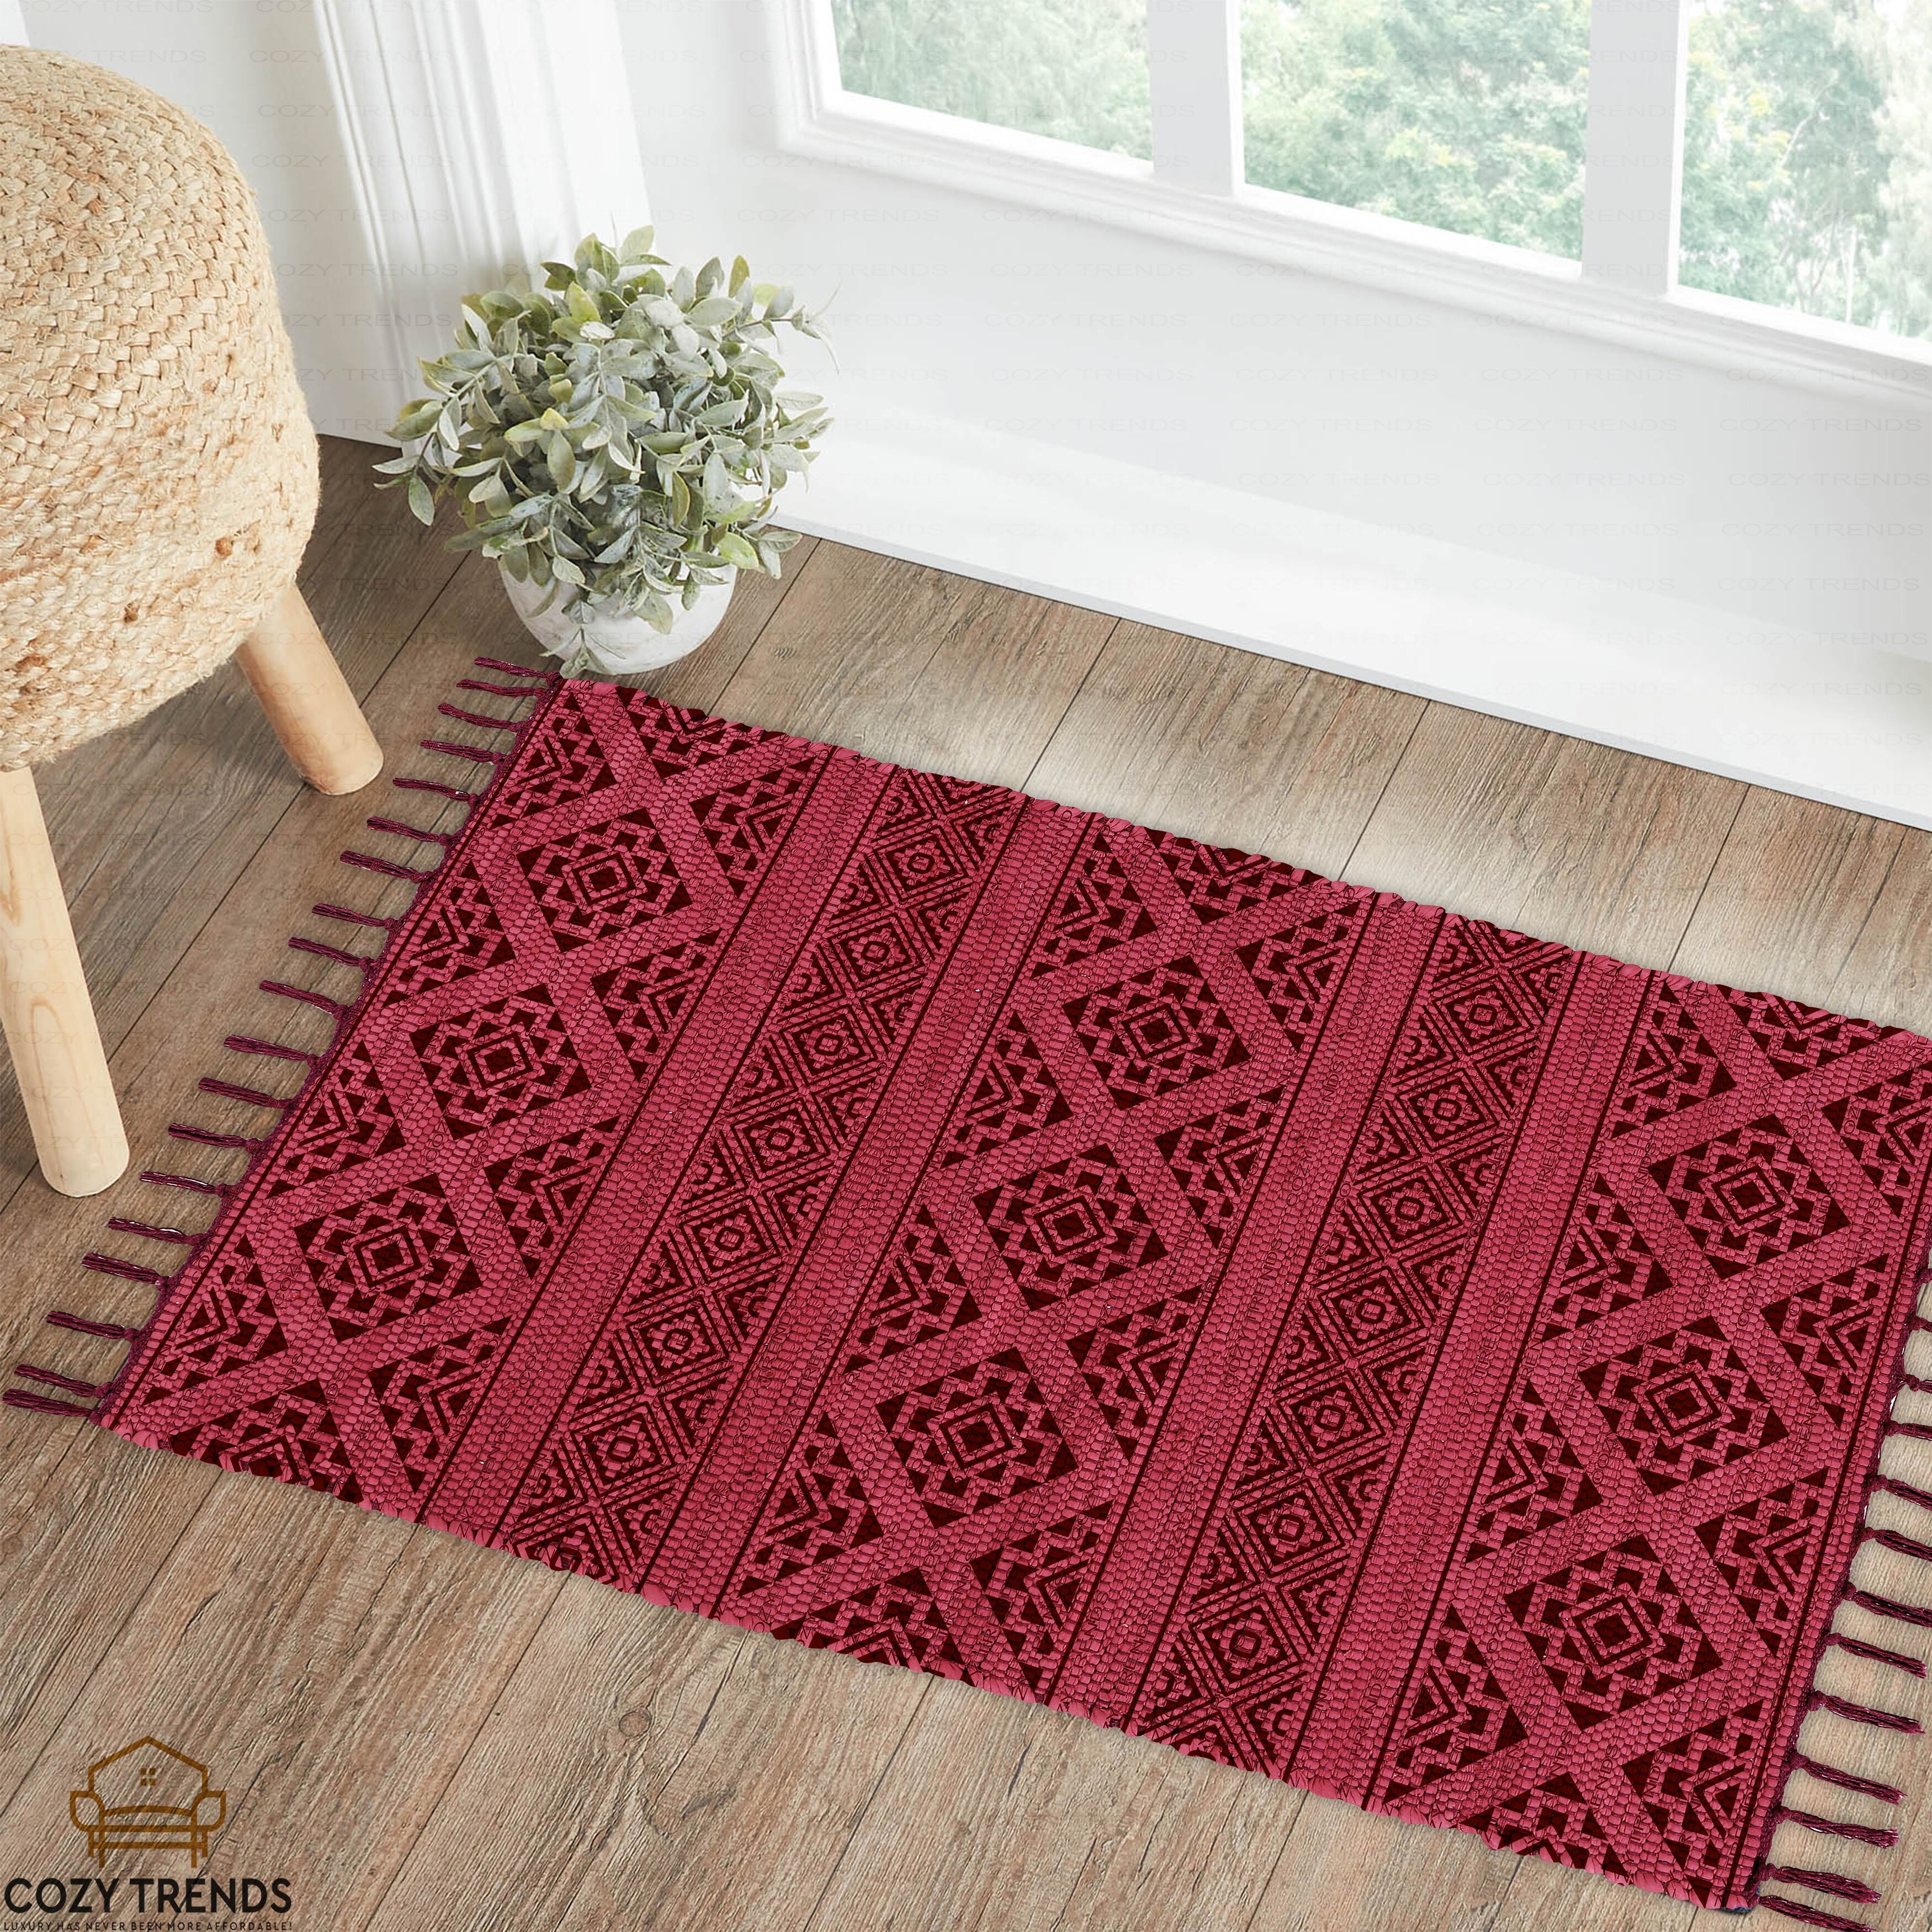 https://ak1.ostkcdn.com/images/products/is/images/direct/8e40d3512511109bcb041bd67aa3bdff6c41384c/Boho-Rug-2%27x3%27%2C-Printed-Small-Rug-with-Tassel-for-Bedroom%2C-Bathroom%2C-Hallway%2C-Laundry%2C-Entryway-Washable-Cotton-Woven-Throw-Rug.jpg